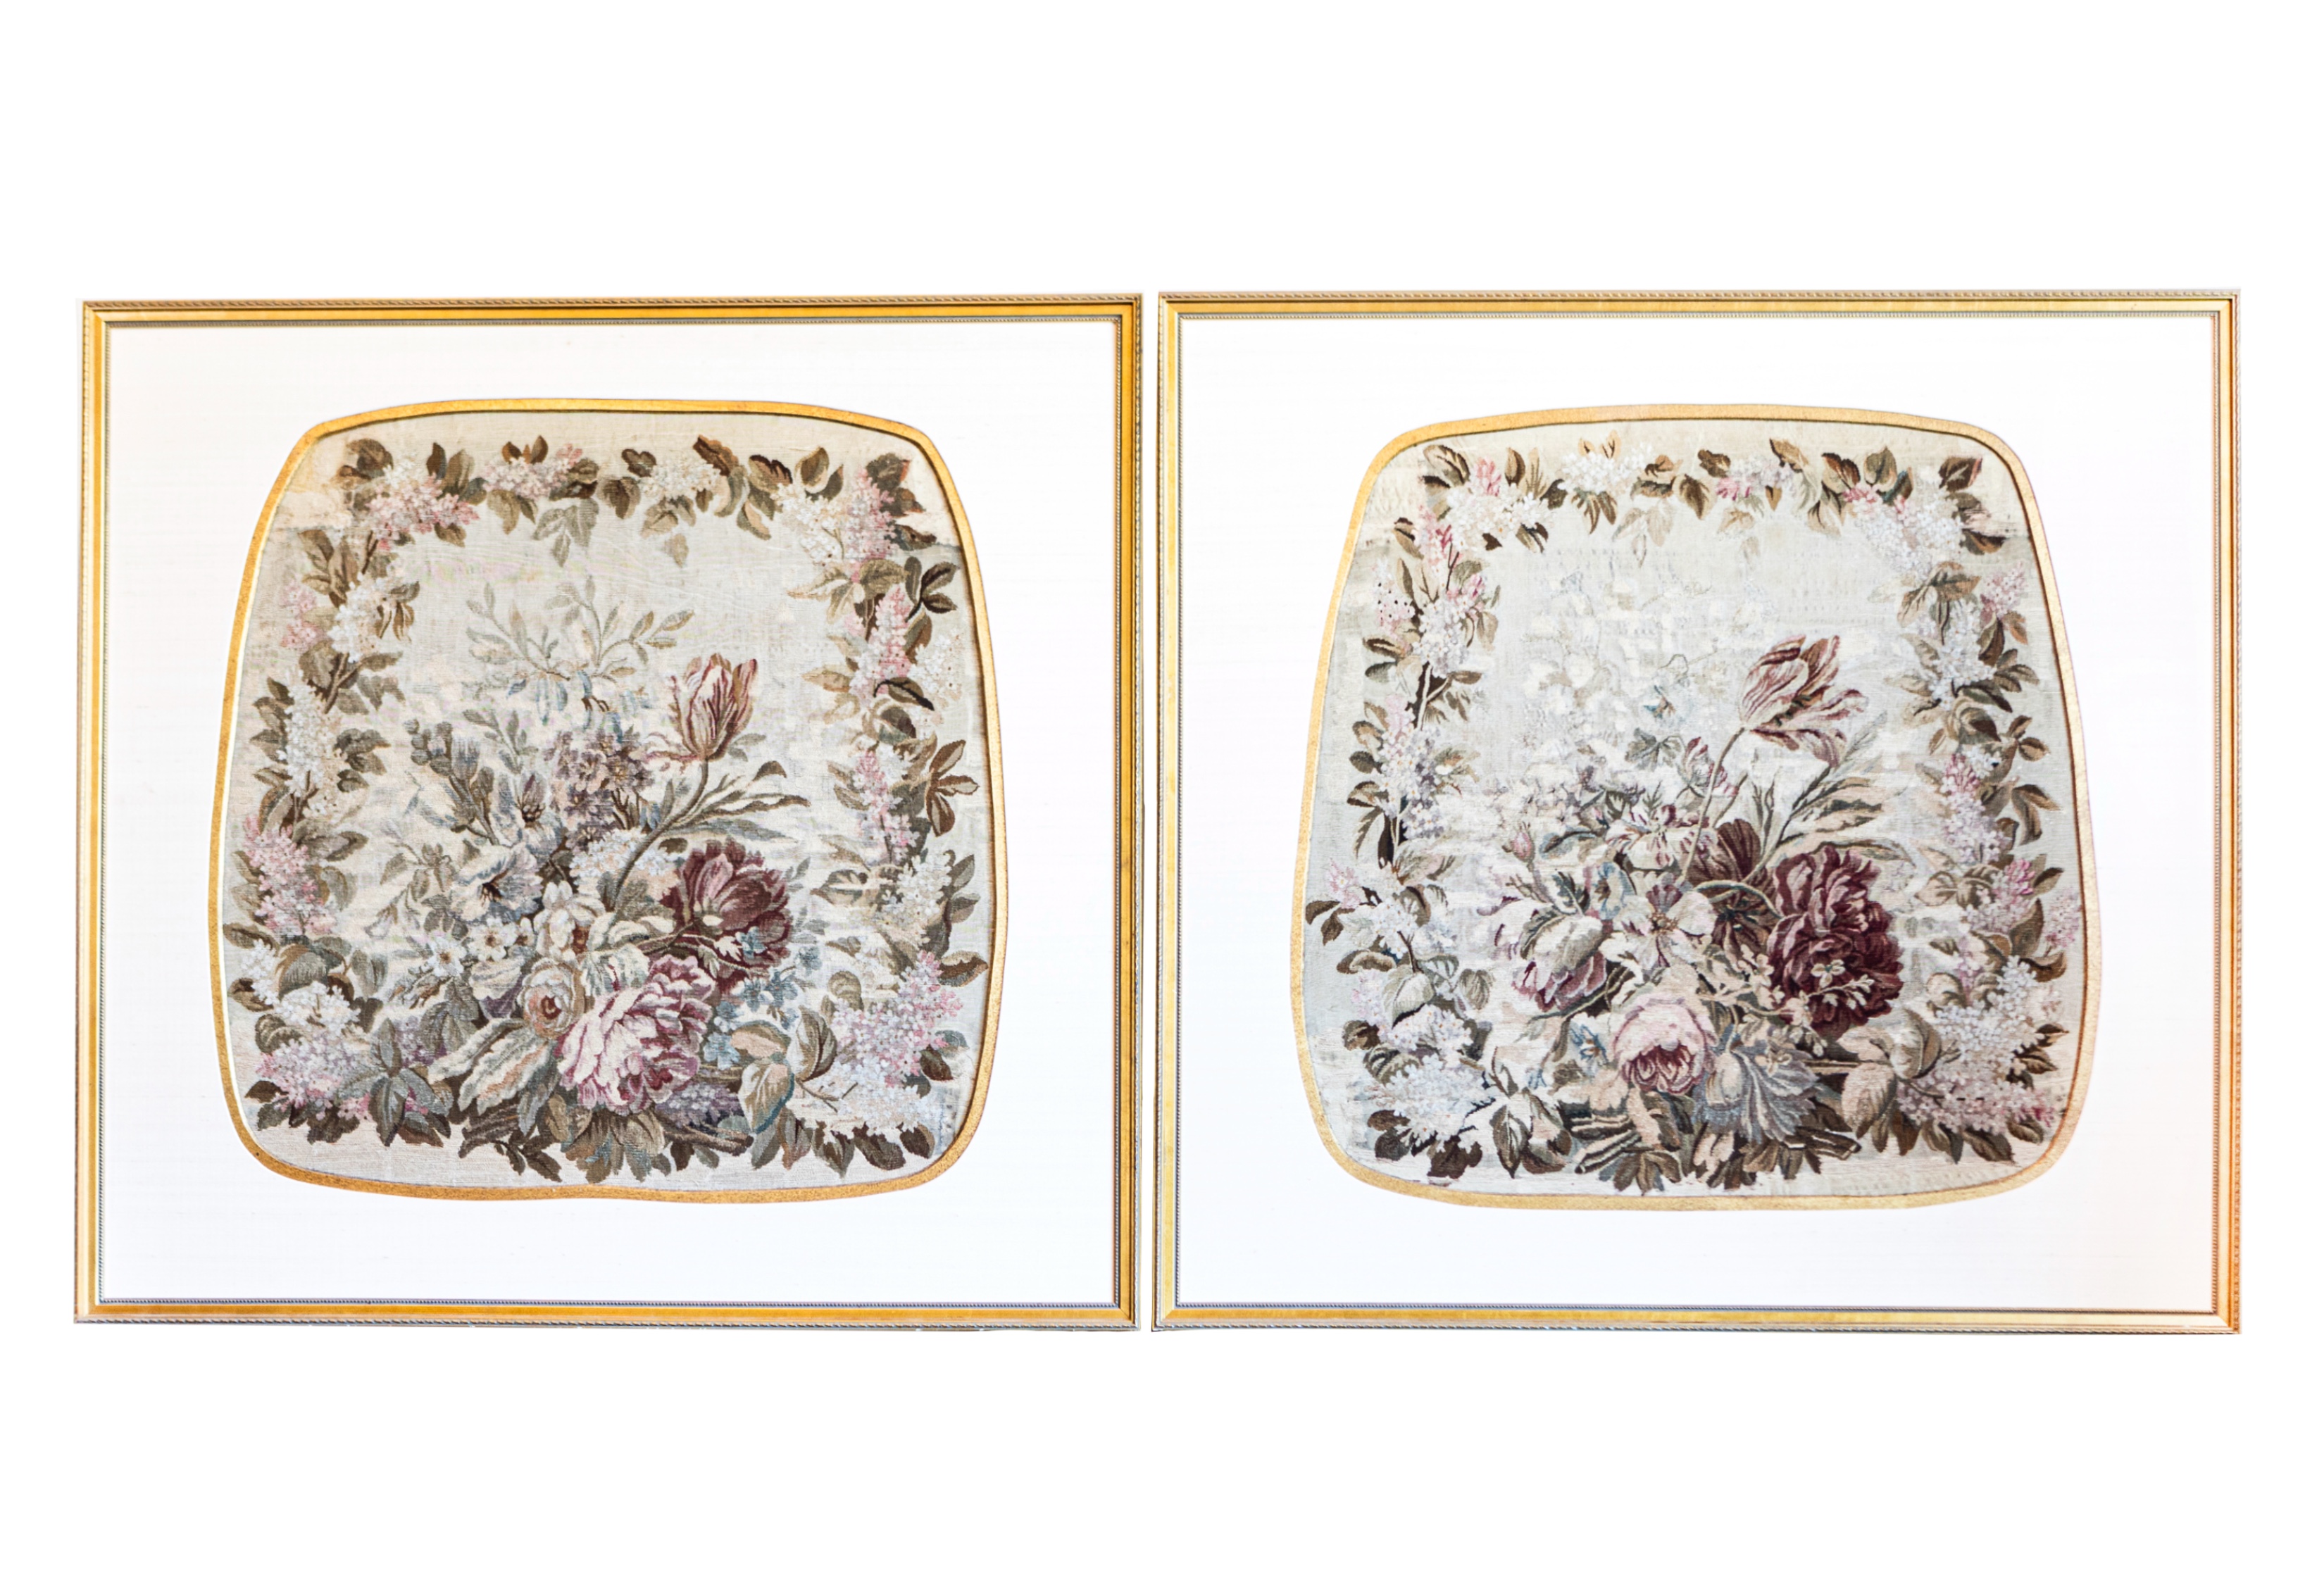 Framed French Silk Aubusson Tapestries with Floral Decor, Sold Individually - 2 avail